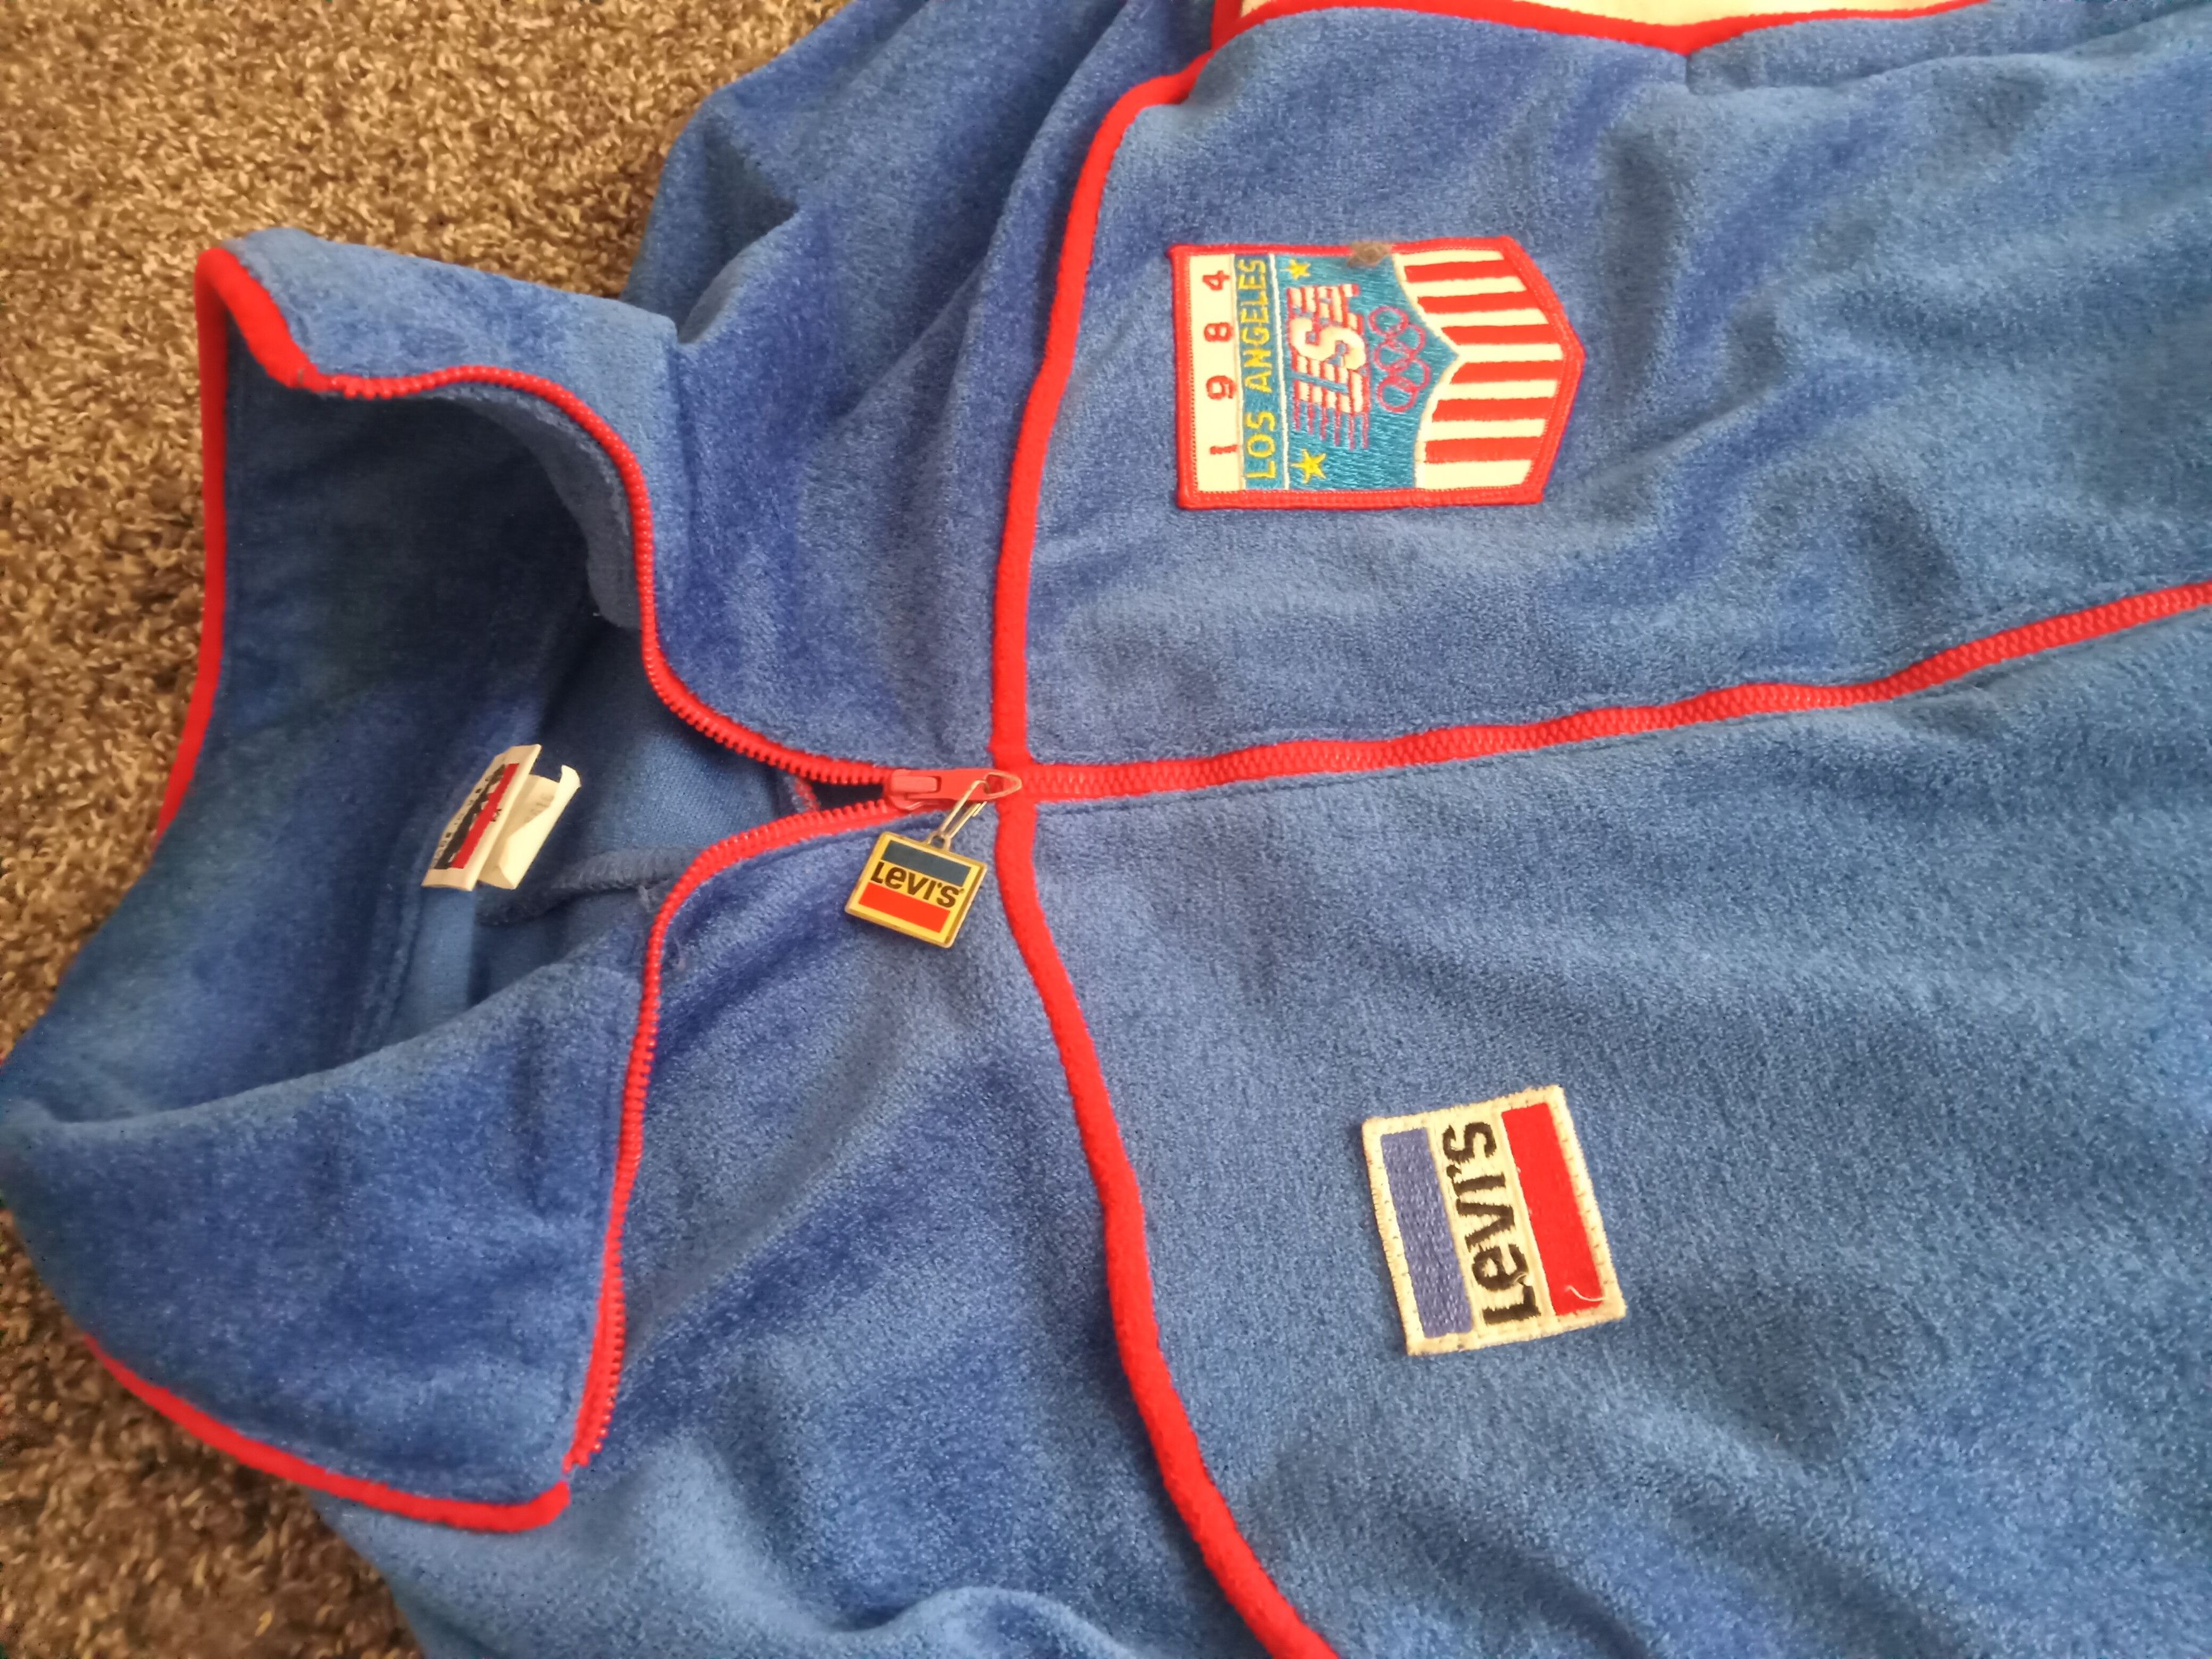 Levi's Vintage Clothing Vintage levis 1984 Olympic team usa outfit ...